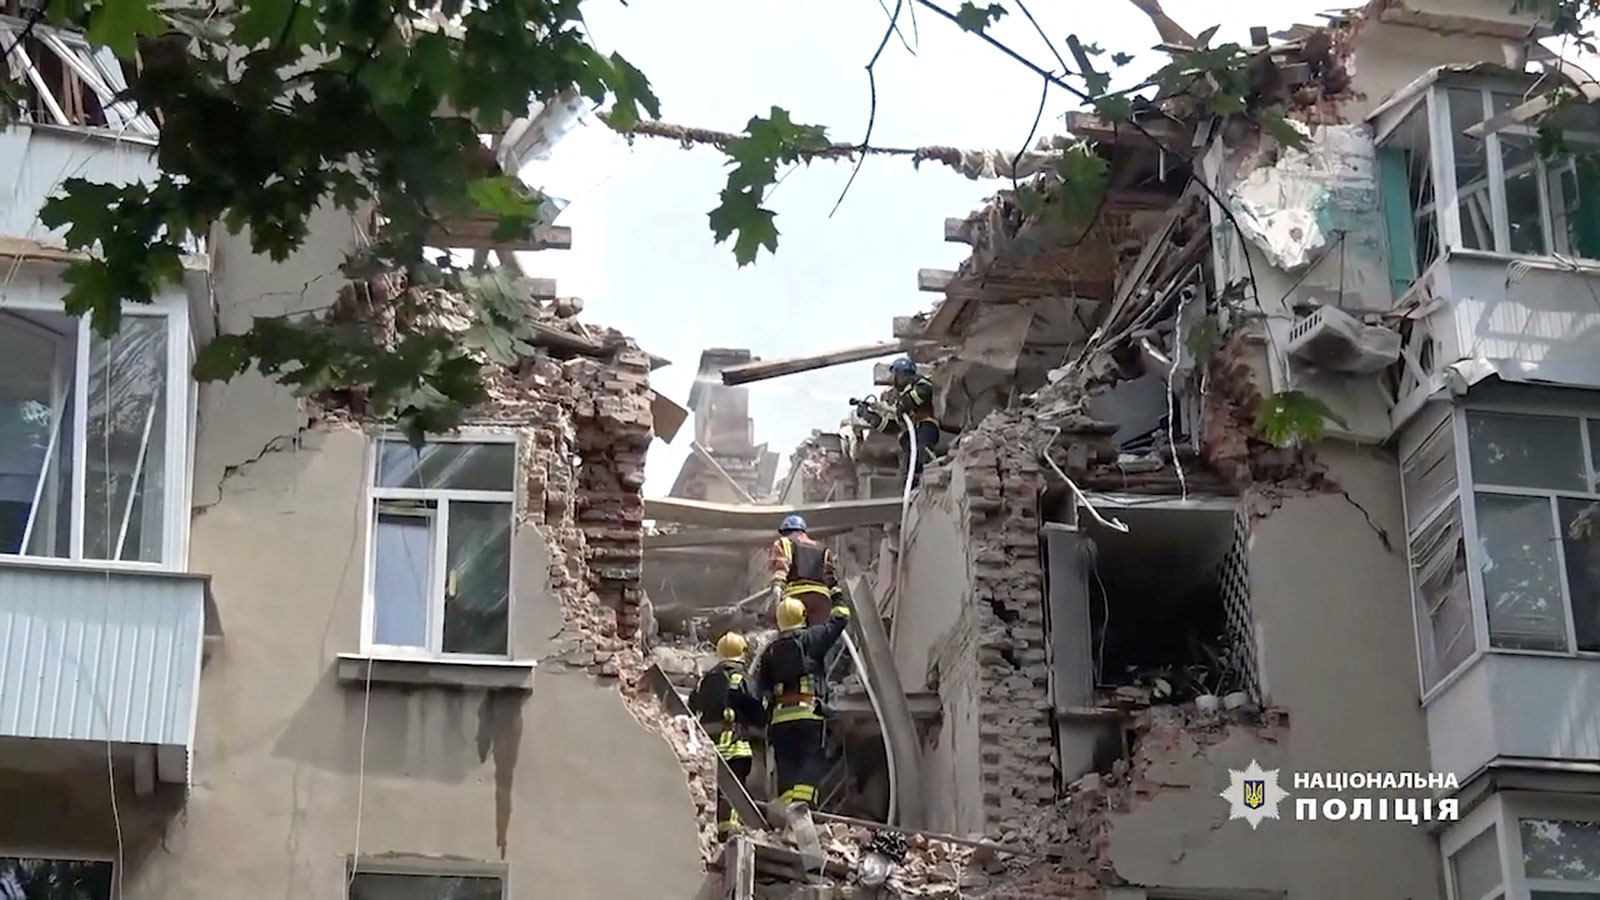 A frame from a video shows rescue workers at a damaged building after a drone strike, in Sumy, Ukraine, on July 3.